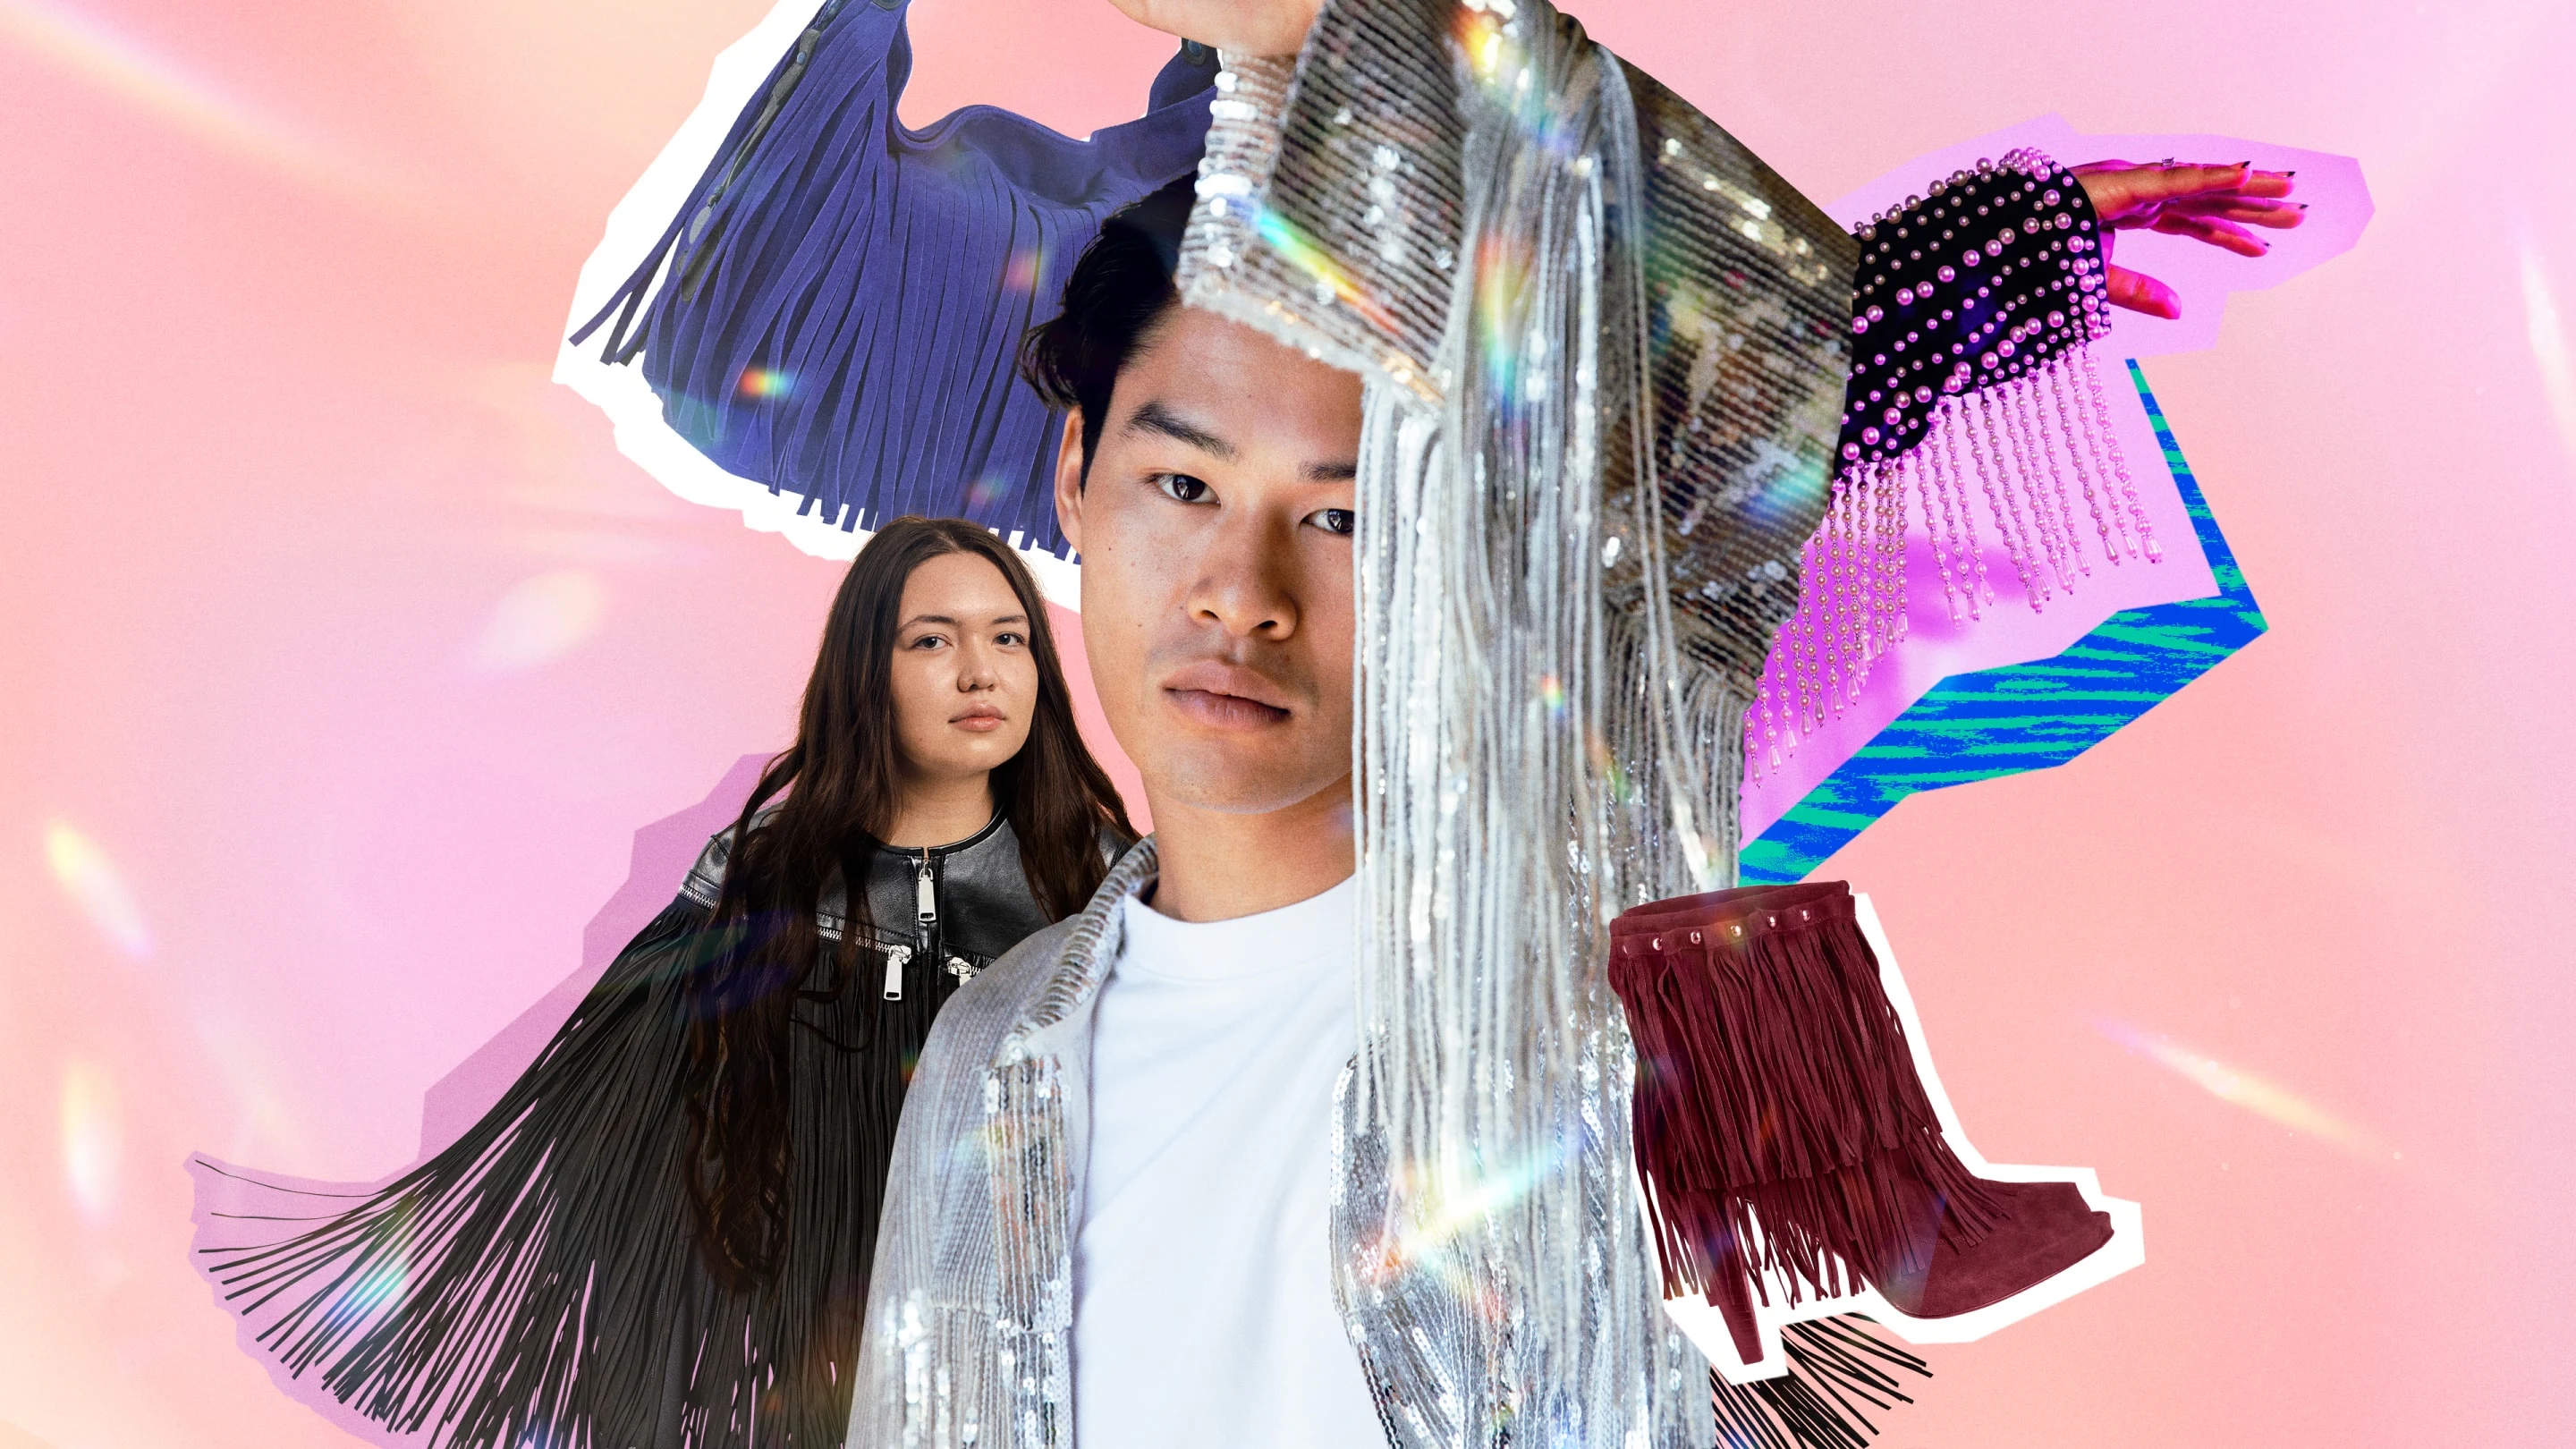 A frilly collage of an Asian man and a Latiné woman wearing fringed clothing surrounded by deconstructed beaded sleeves and fringed brown boots.